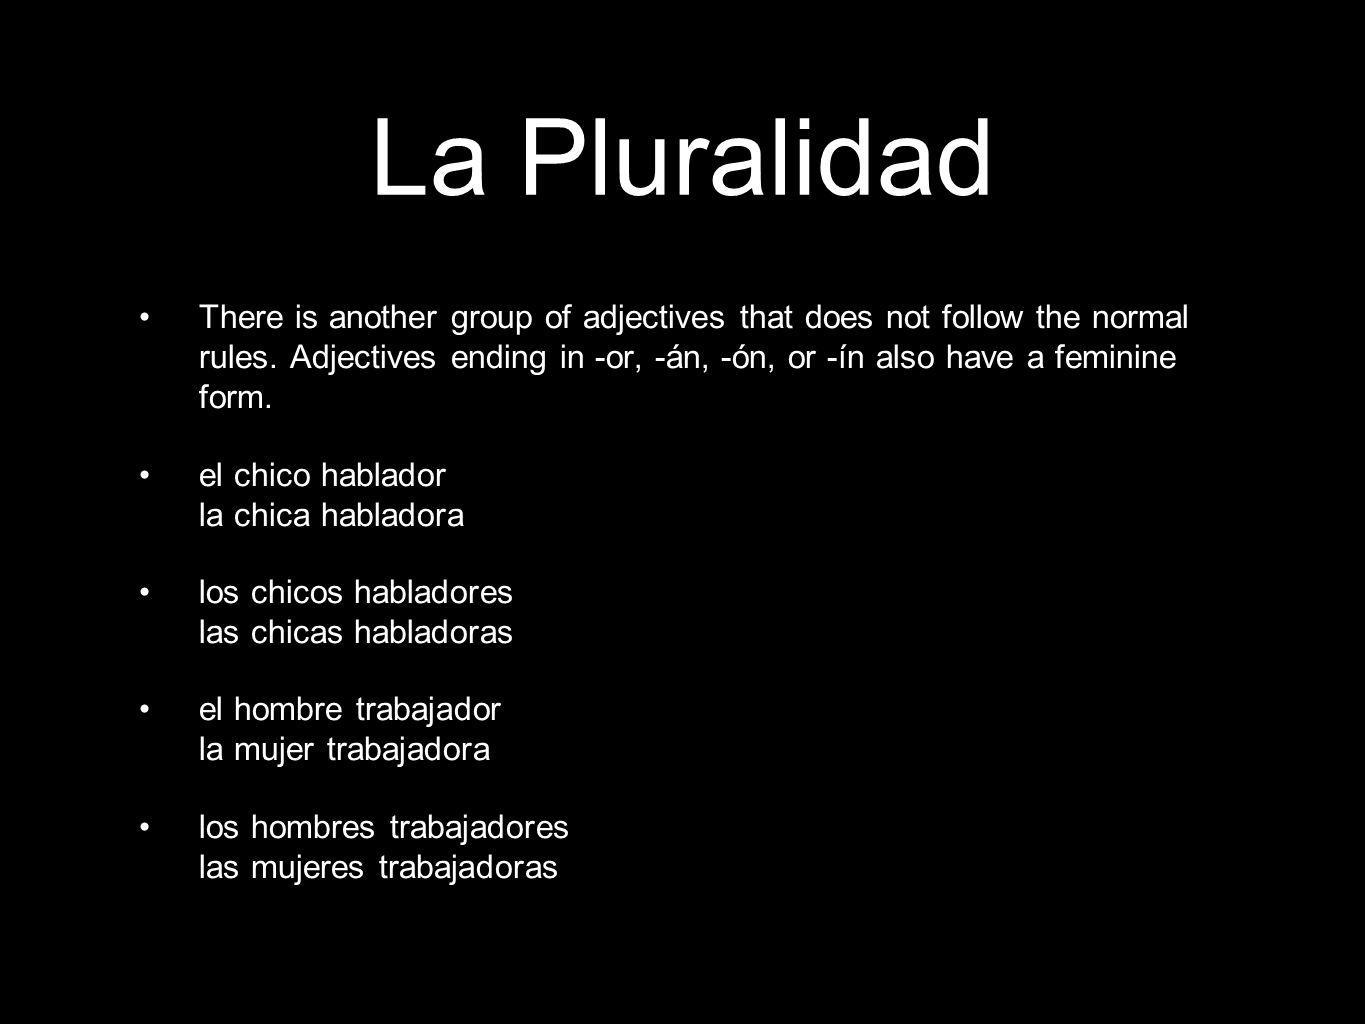 La Pluralidad There is another group of adjectives that does not follow the normal rules.